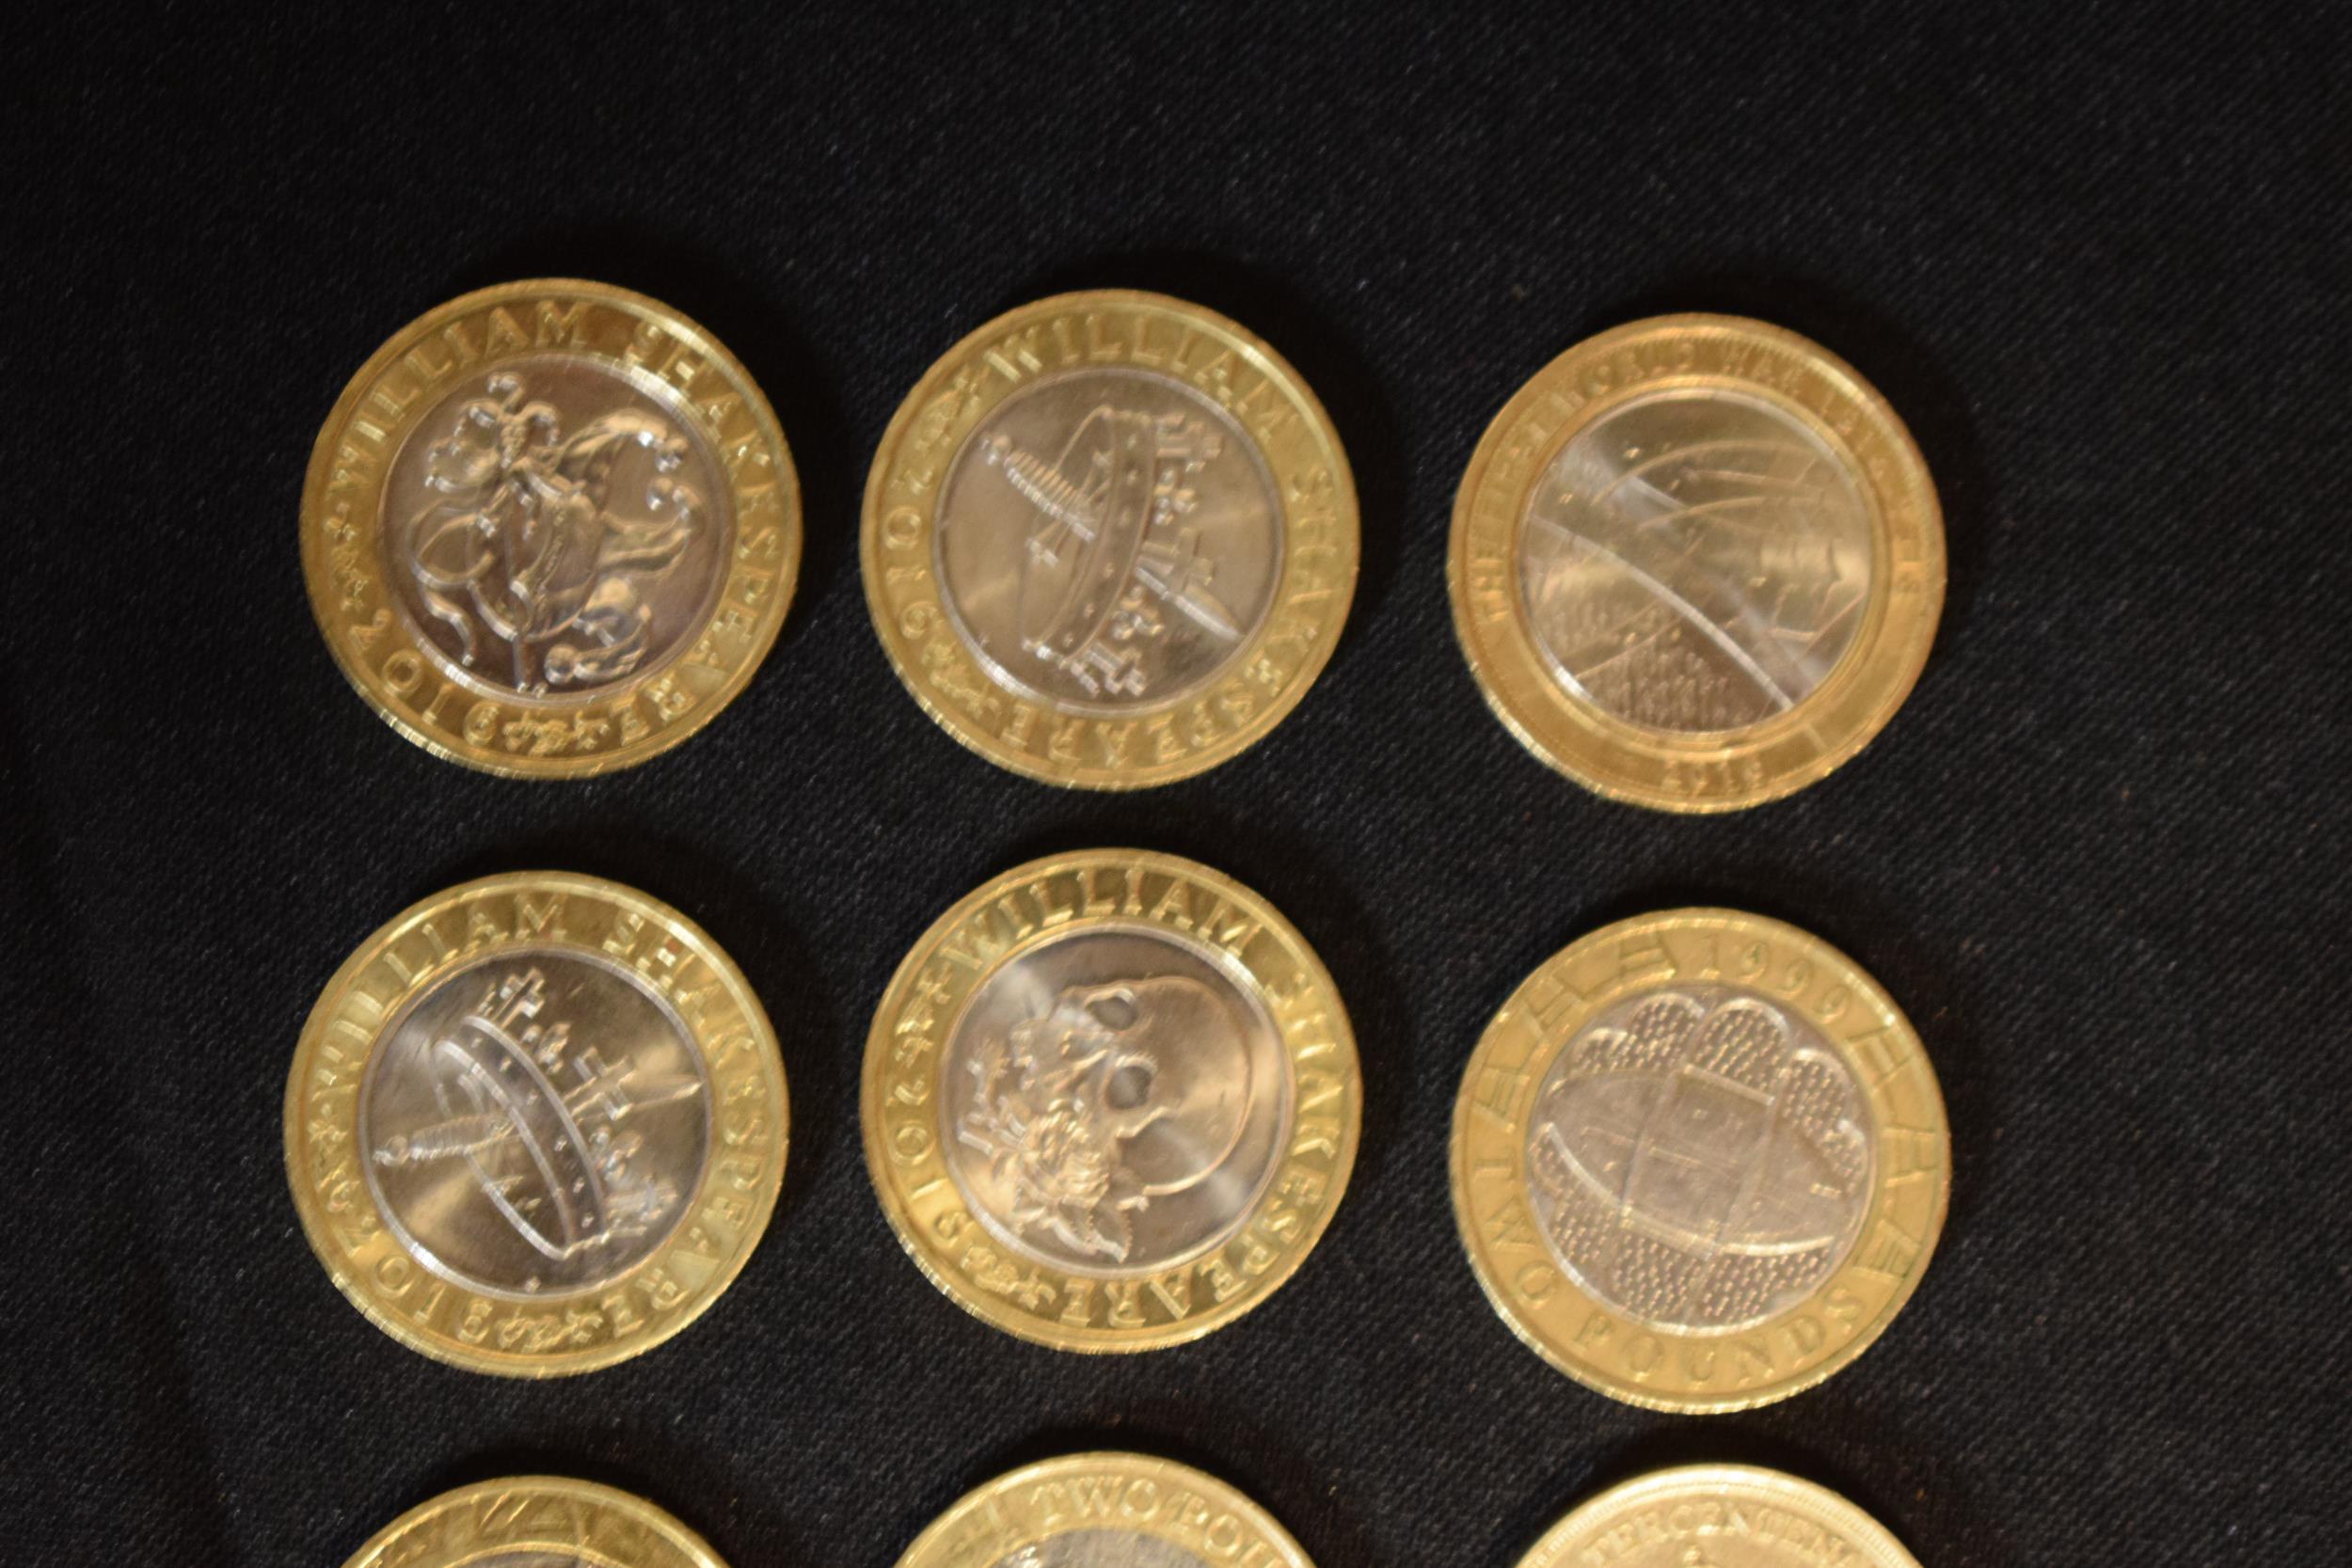 A collection of UK £2 coins to include William Shakespeare examples, Industrial Progress and old £ - Image 4 of 5